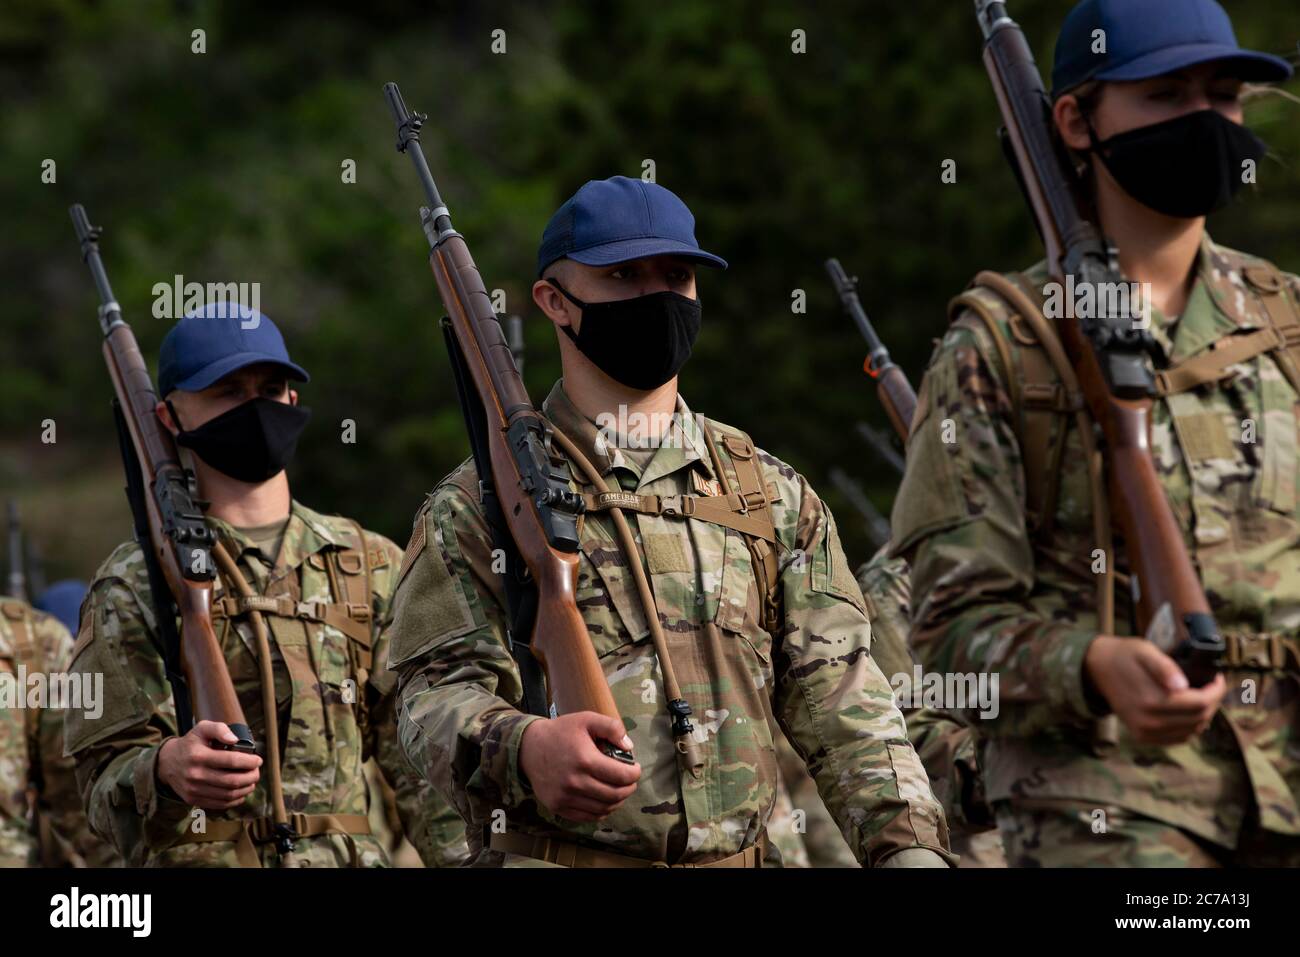 U.S. Air Force Academy cadets from the class of 2024 March Out to Jacks Valley wearing PPE and social distancing, to begin Basic Cadet Training at the Air Force Academy July 13, 2020 in Colorado Springs, Colorado. Stock Photo